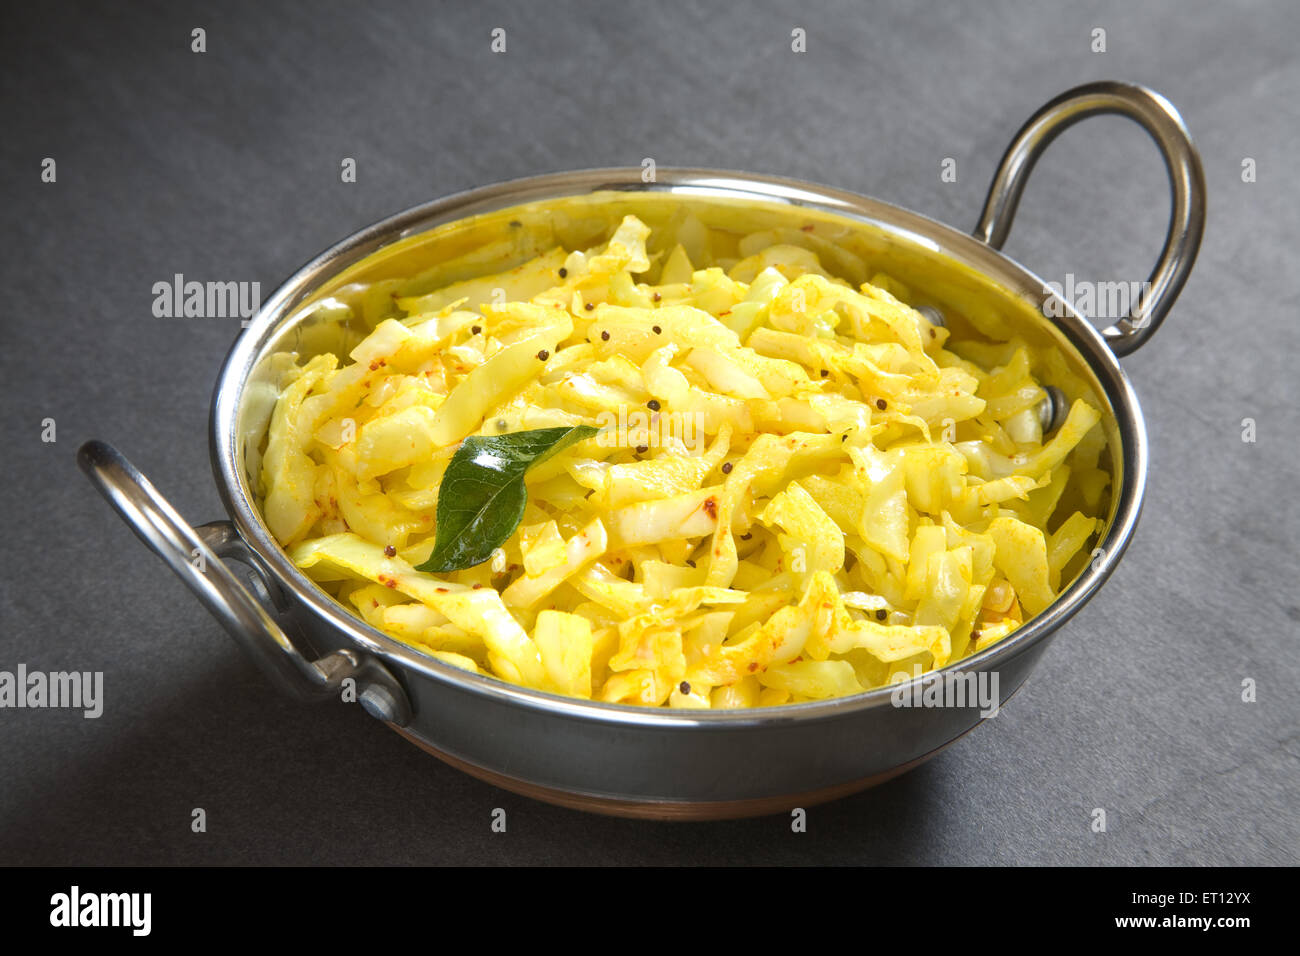 Vegetarian meal ; fry cabbage in pot on grey background 20 May 2010 Stock Photo